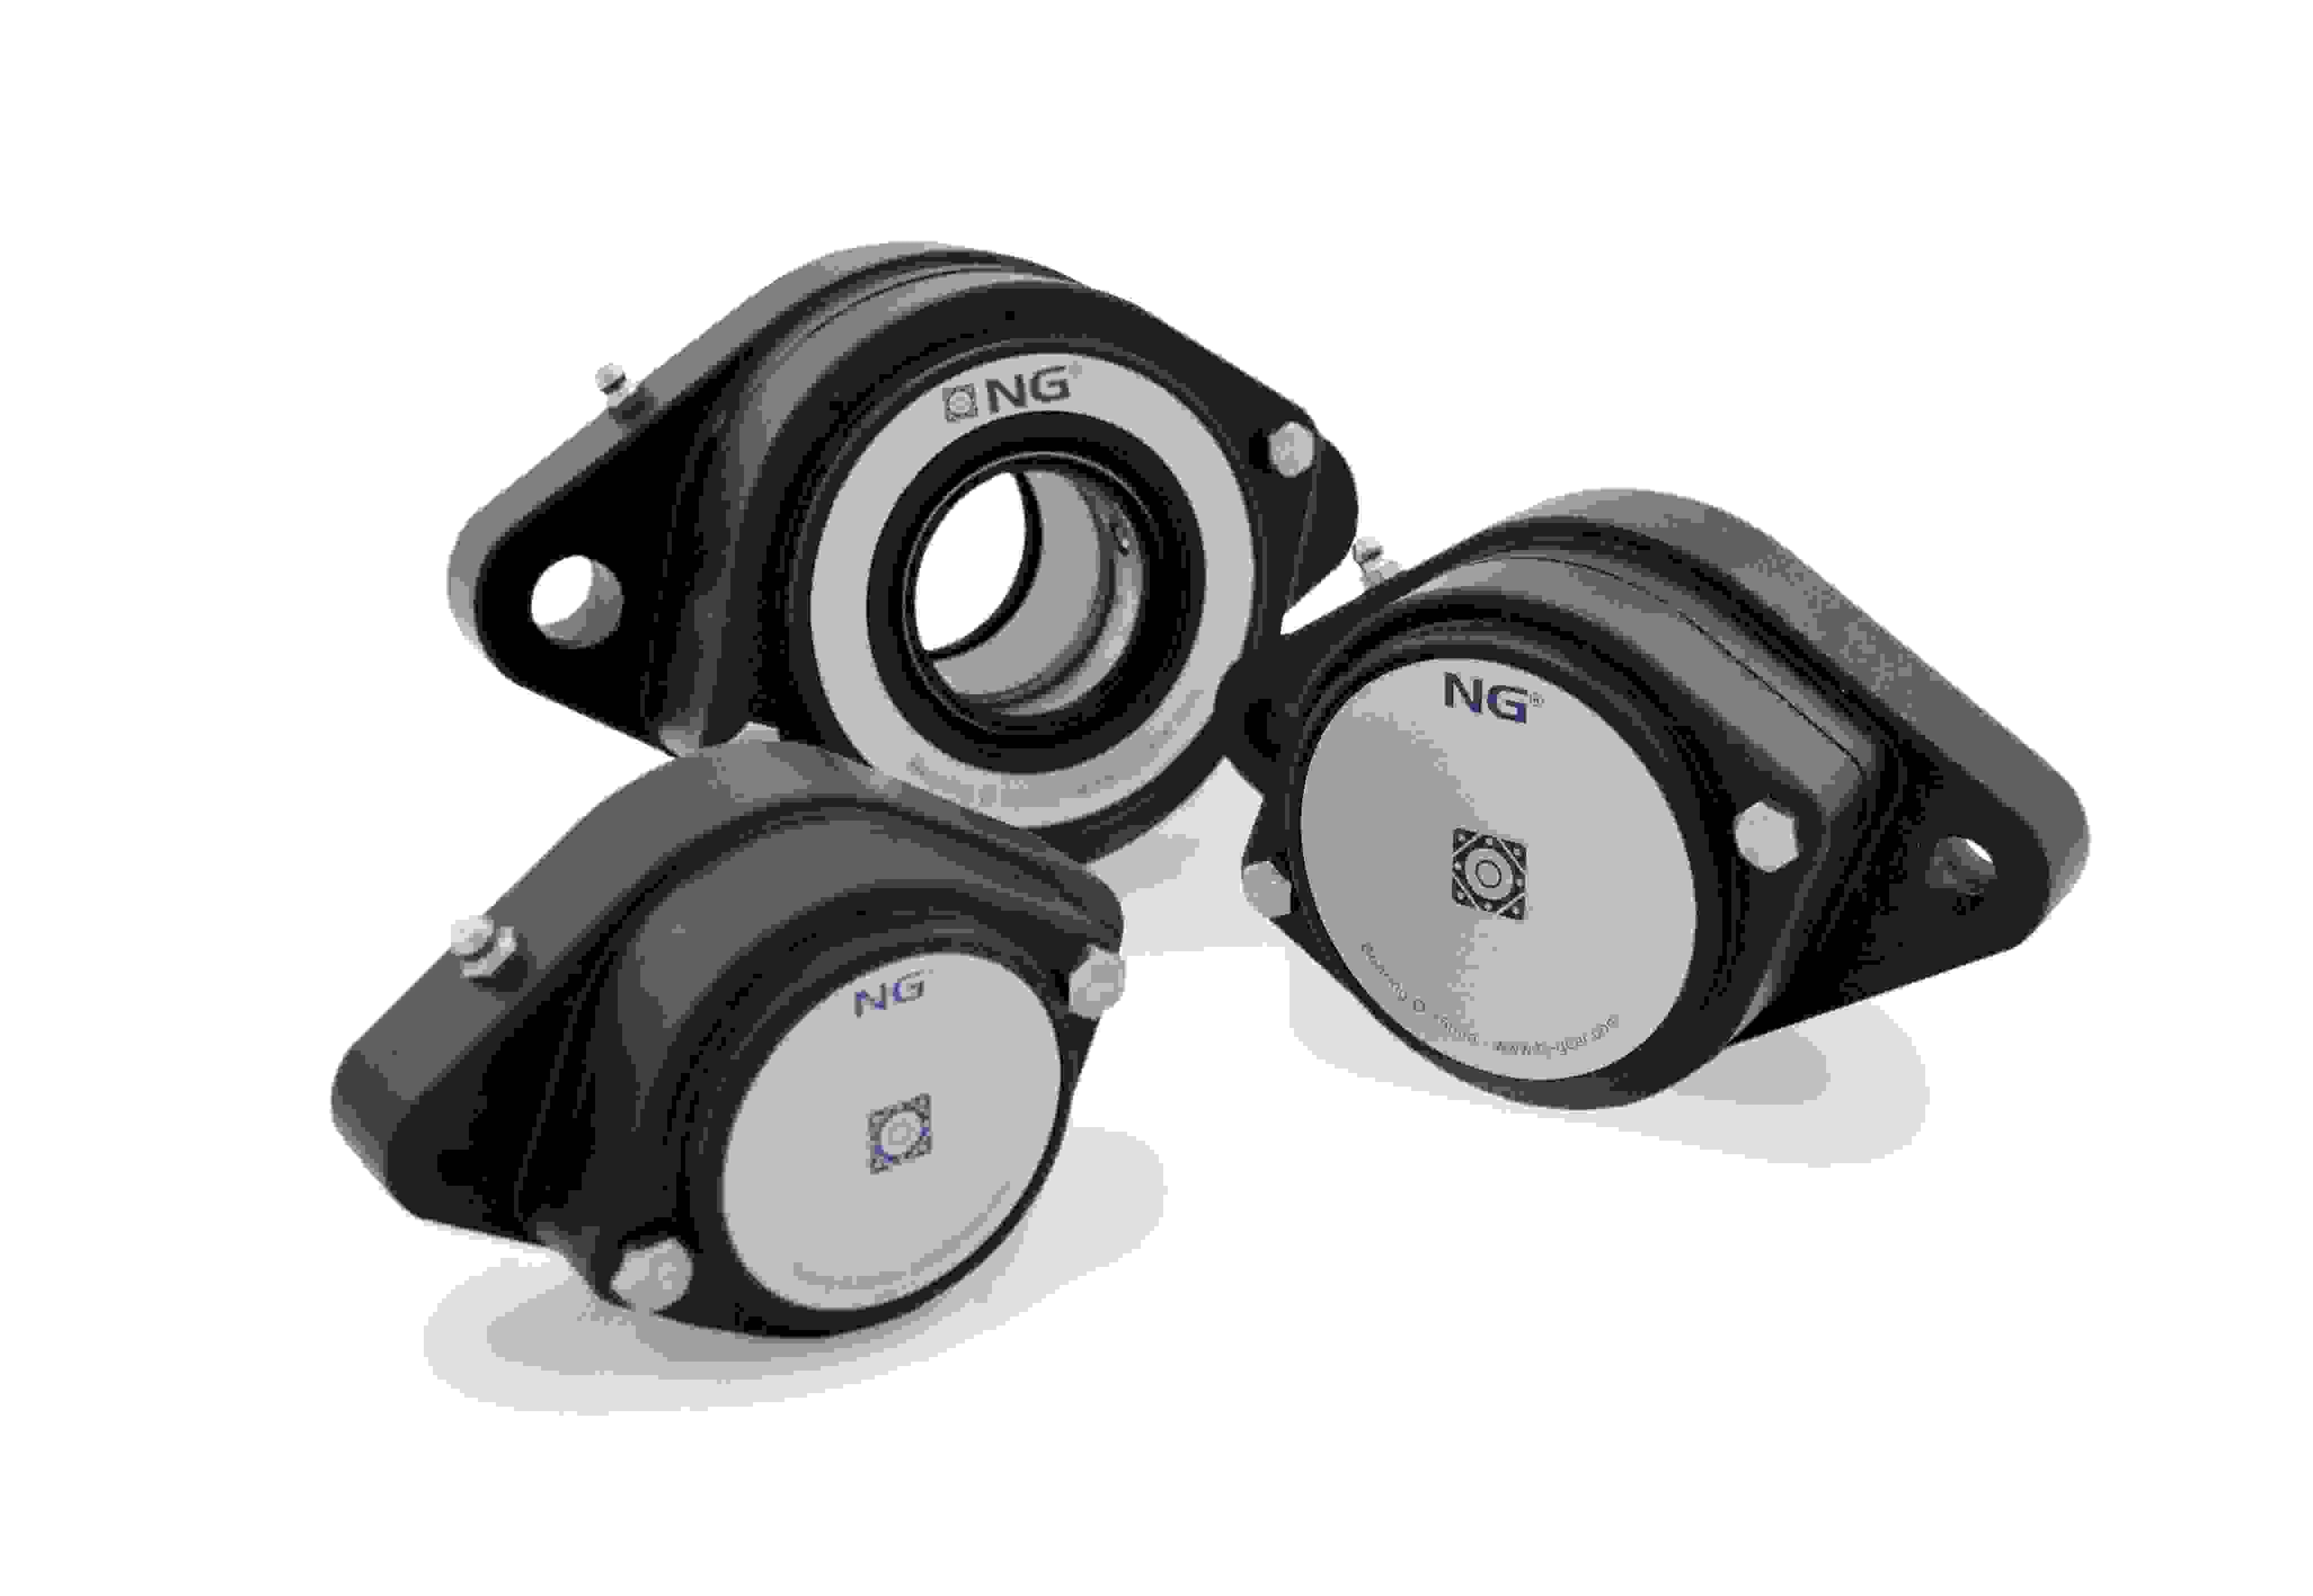 Three F2 2-bolt flange bearings with open and closed covers on transparent background